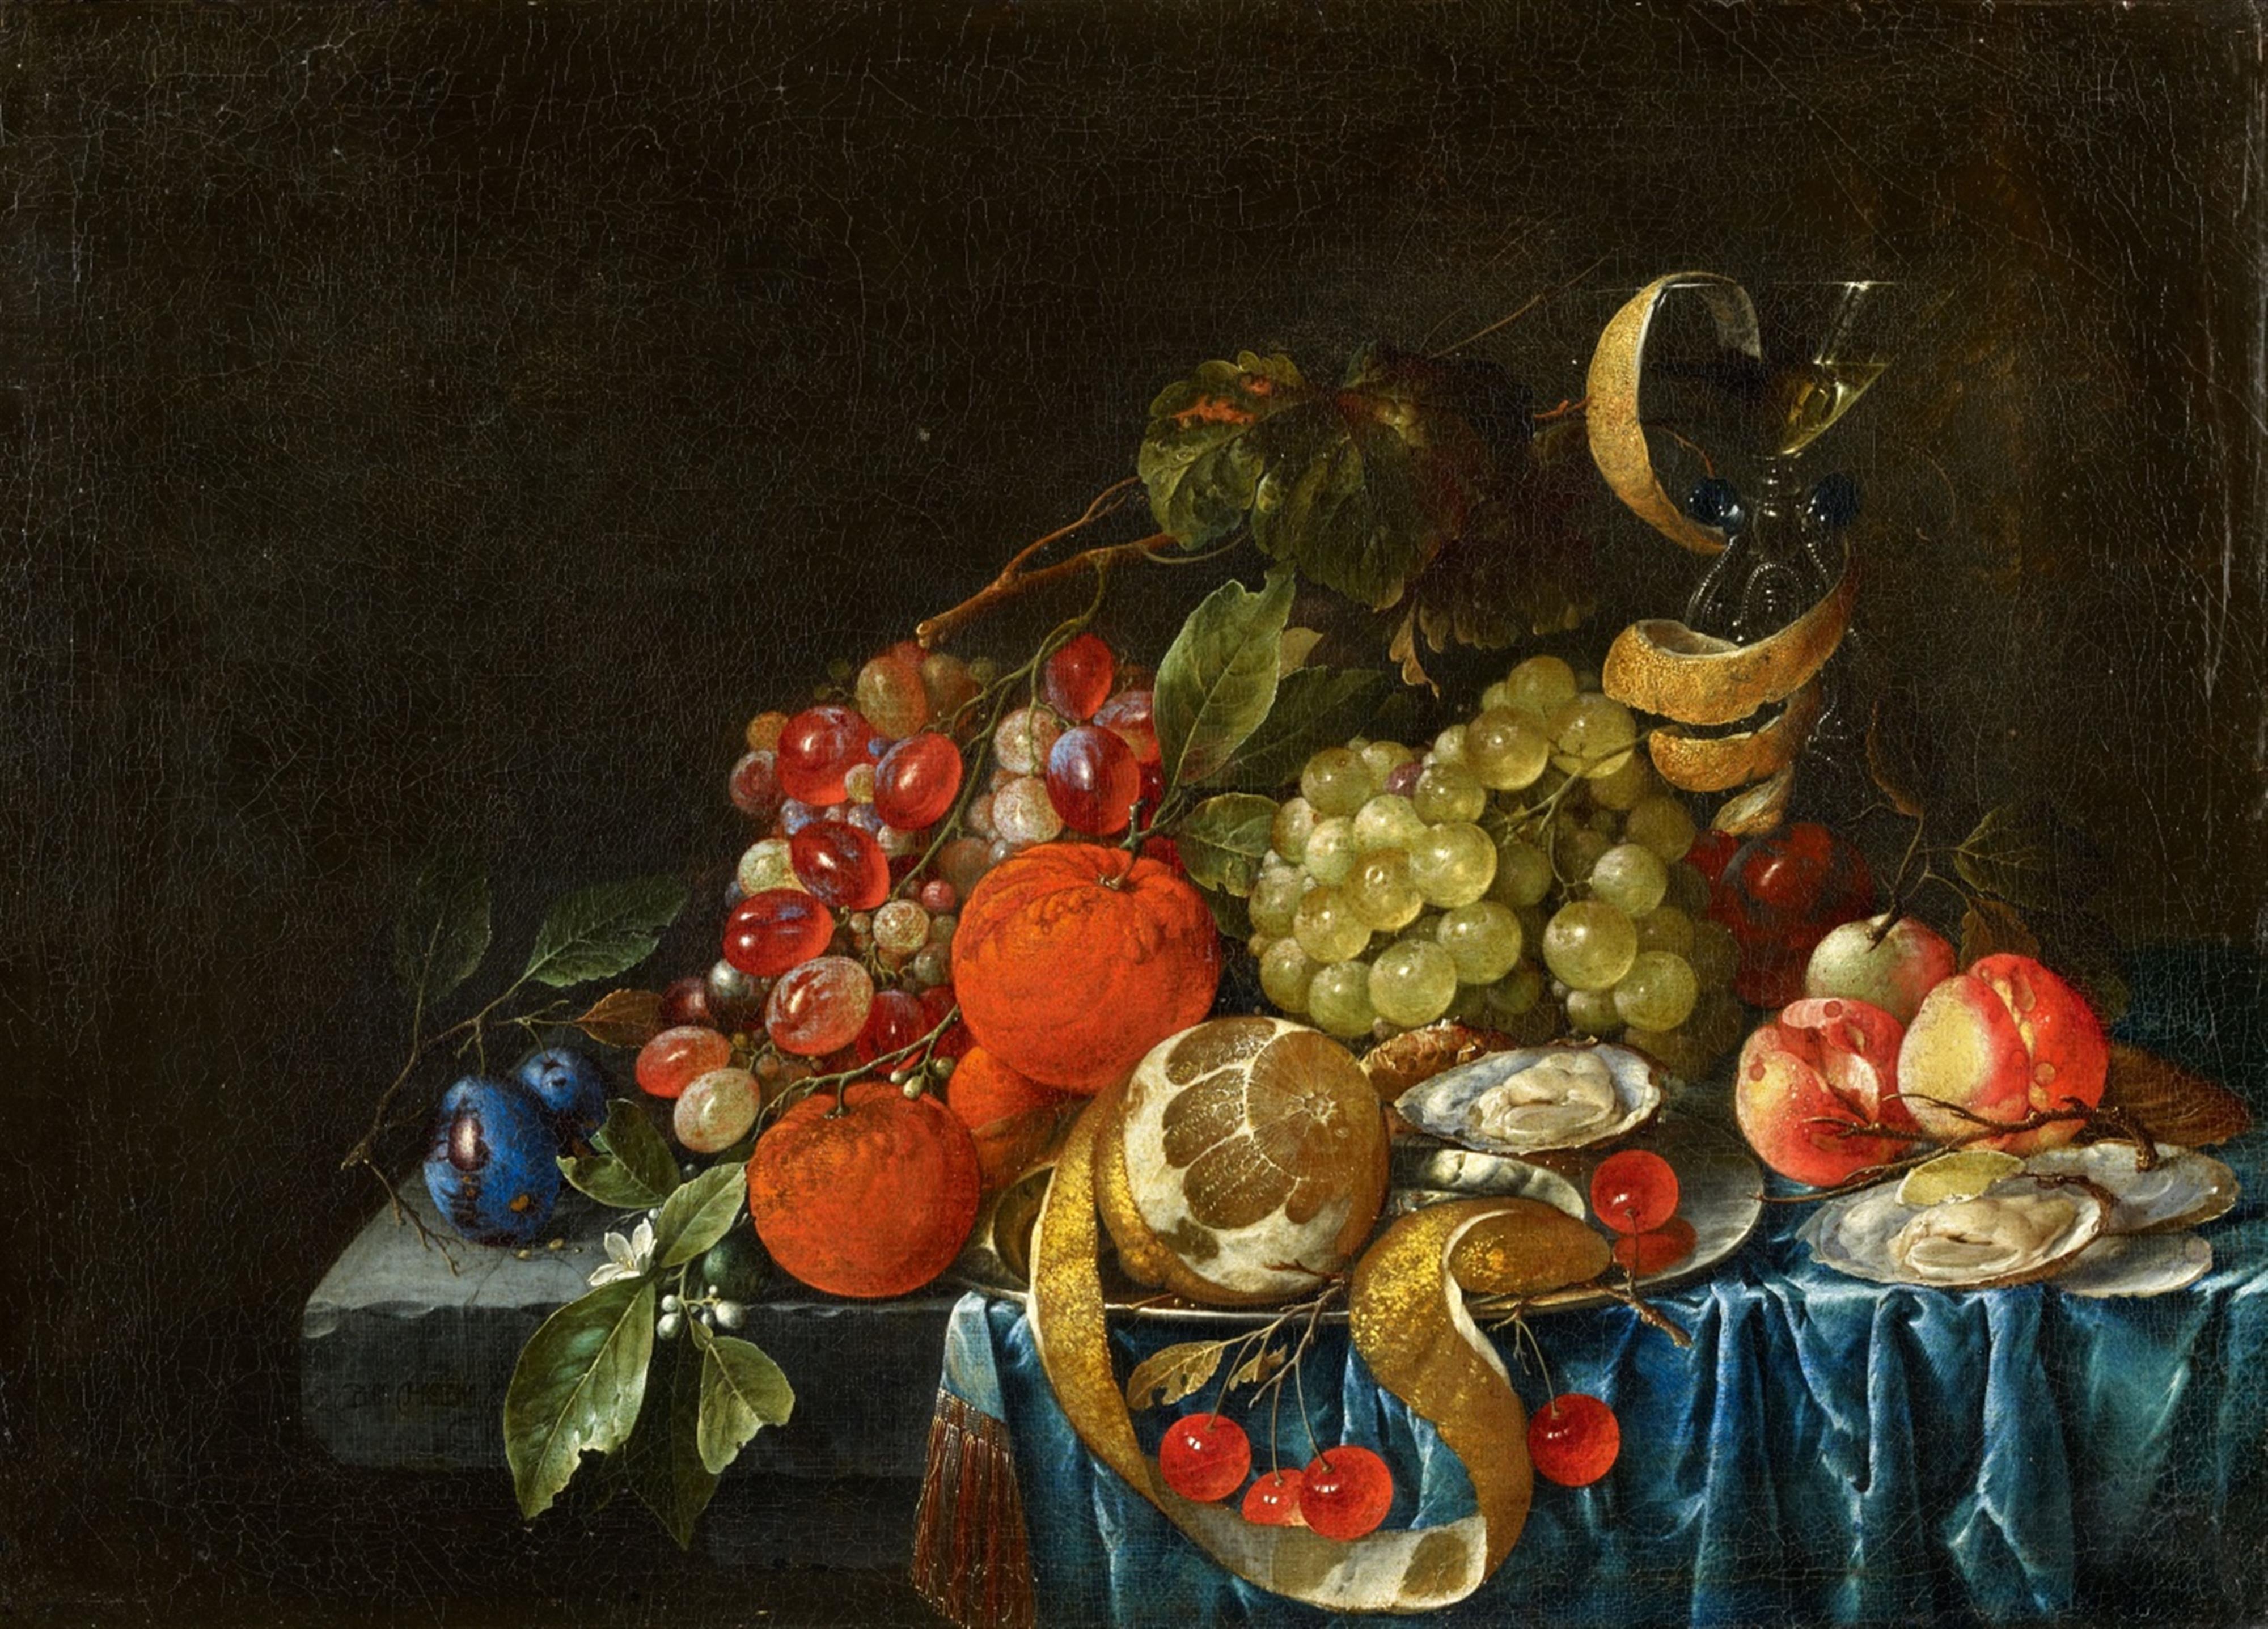 Cornelis de Heem - Fruit Still Life with Oysters and a Wine Glass